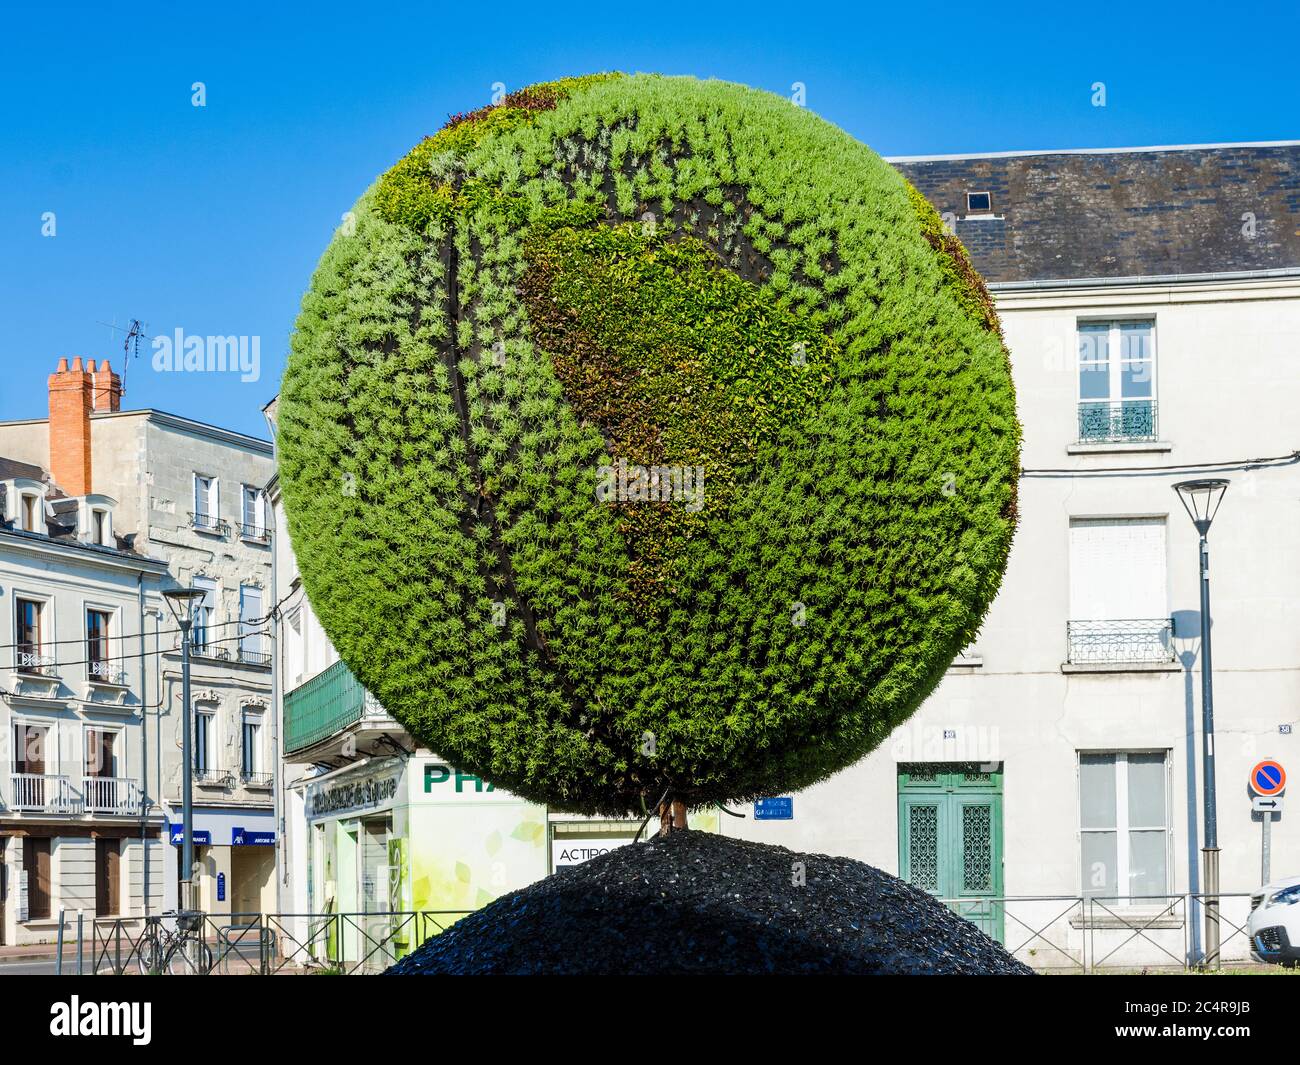 Thematic living plant display showing the Earth - Chatellerault, Vienne (86), France. Stock Photo